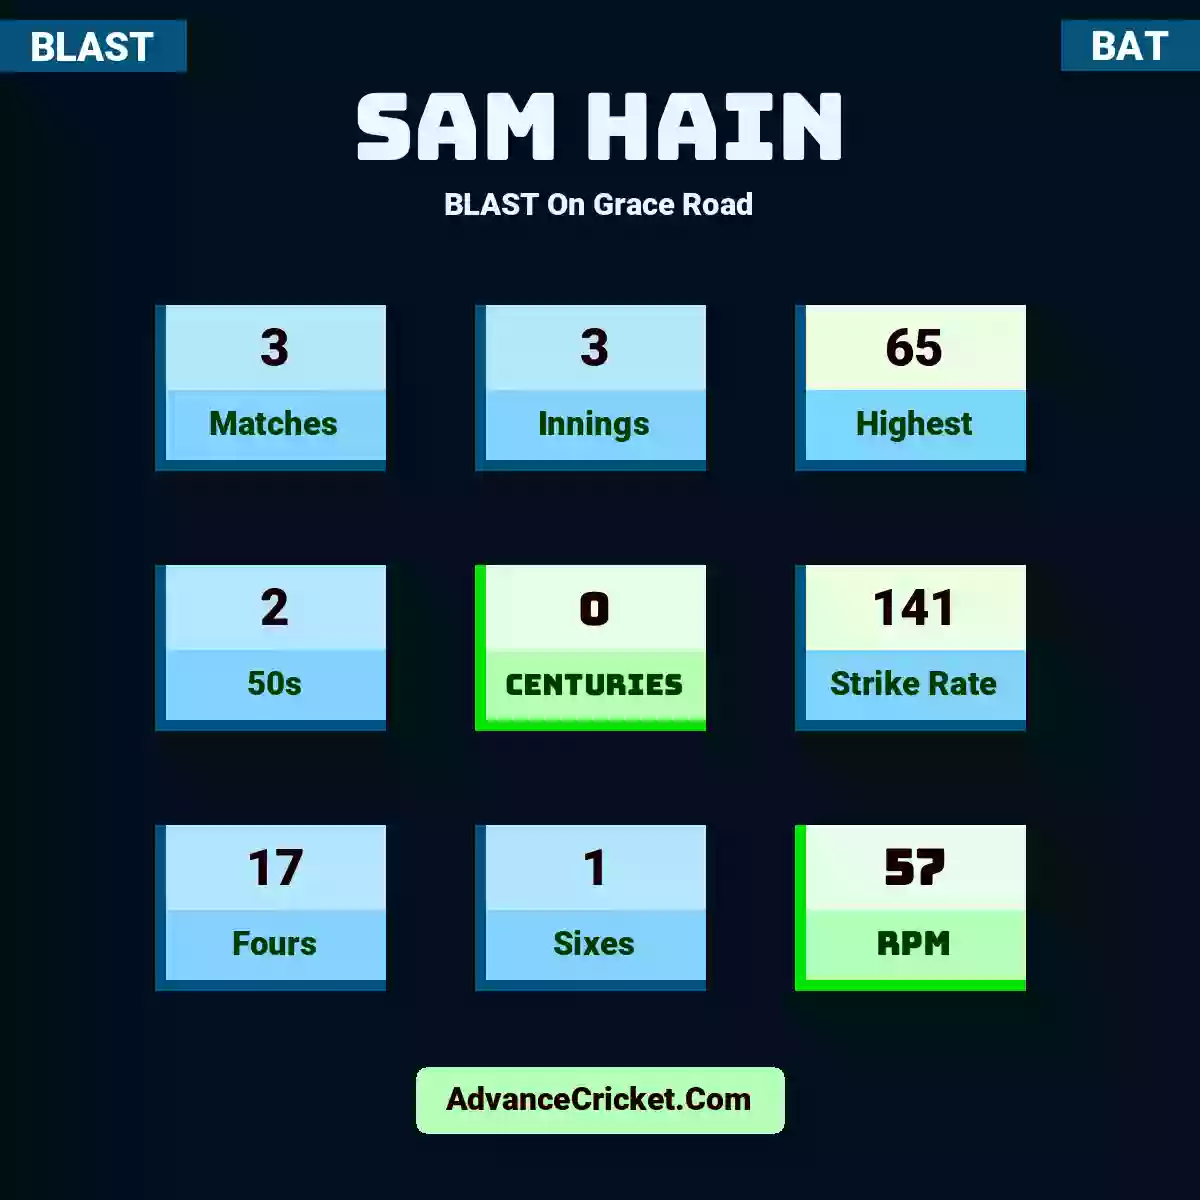 Sam Hain BLAST  On Grace Road, Sam Hain played 3 matches, scored 65 runs as highest, 2 half-centuries, and 0 centuries, with a strike rate of 141. S.Hain hit 17 fours and 1 sixes, with an RPM of 57.